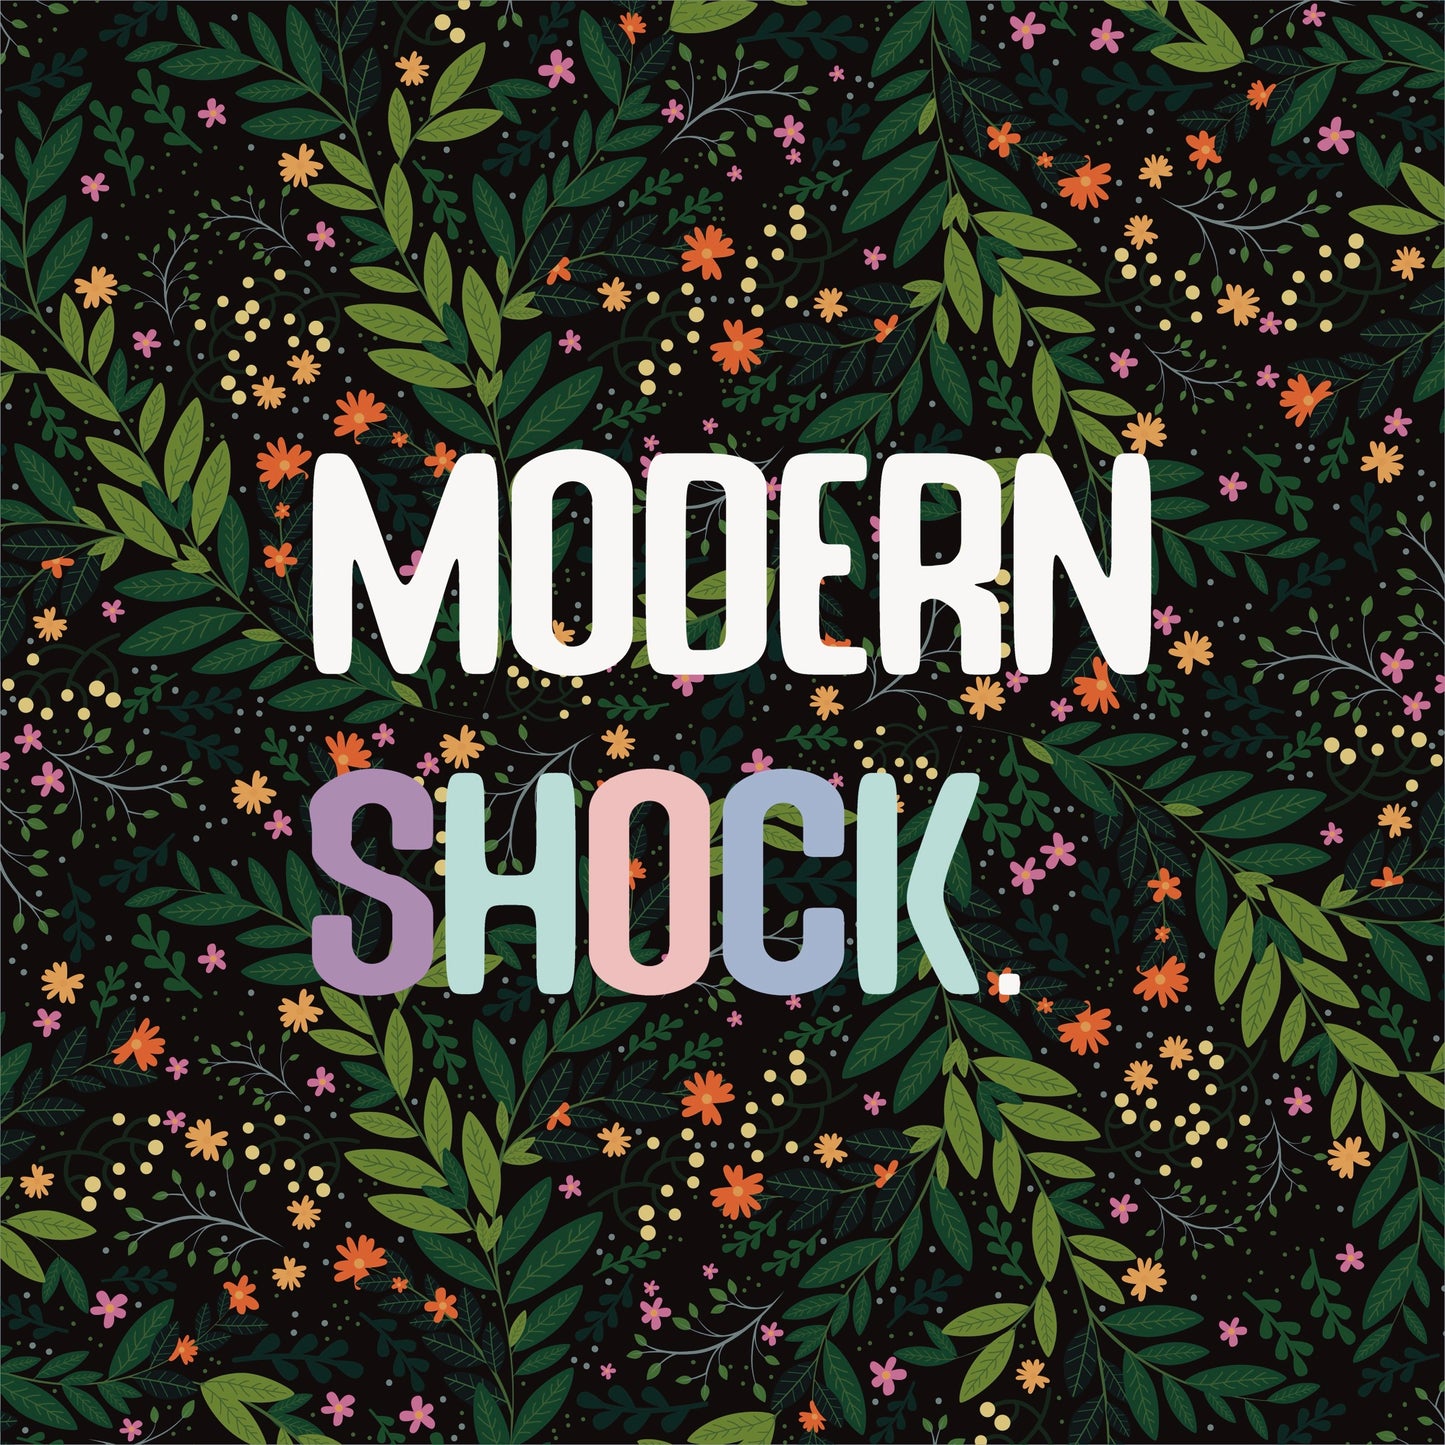 the cover of modern shock